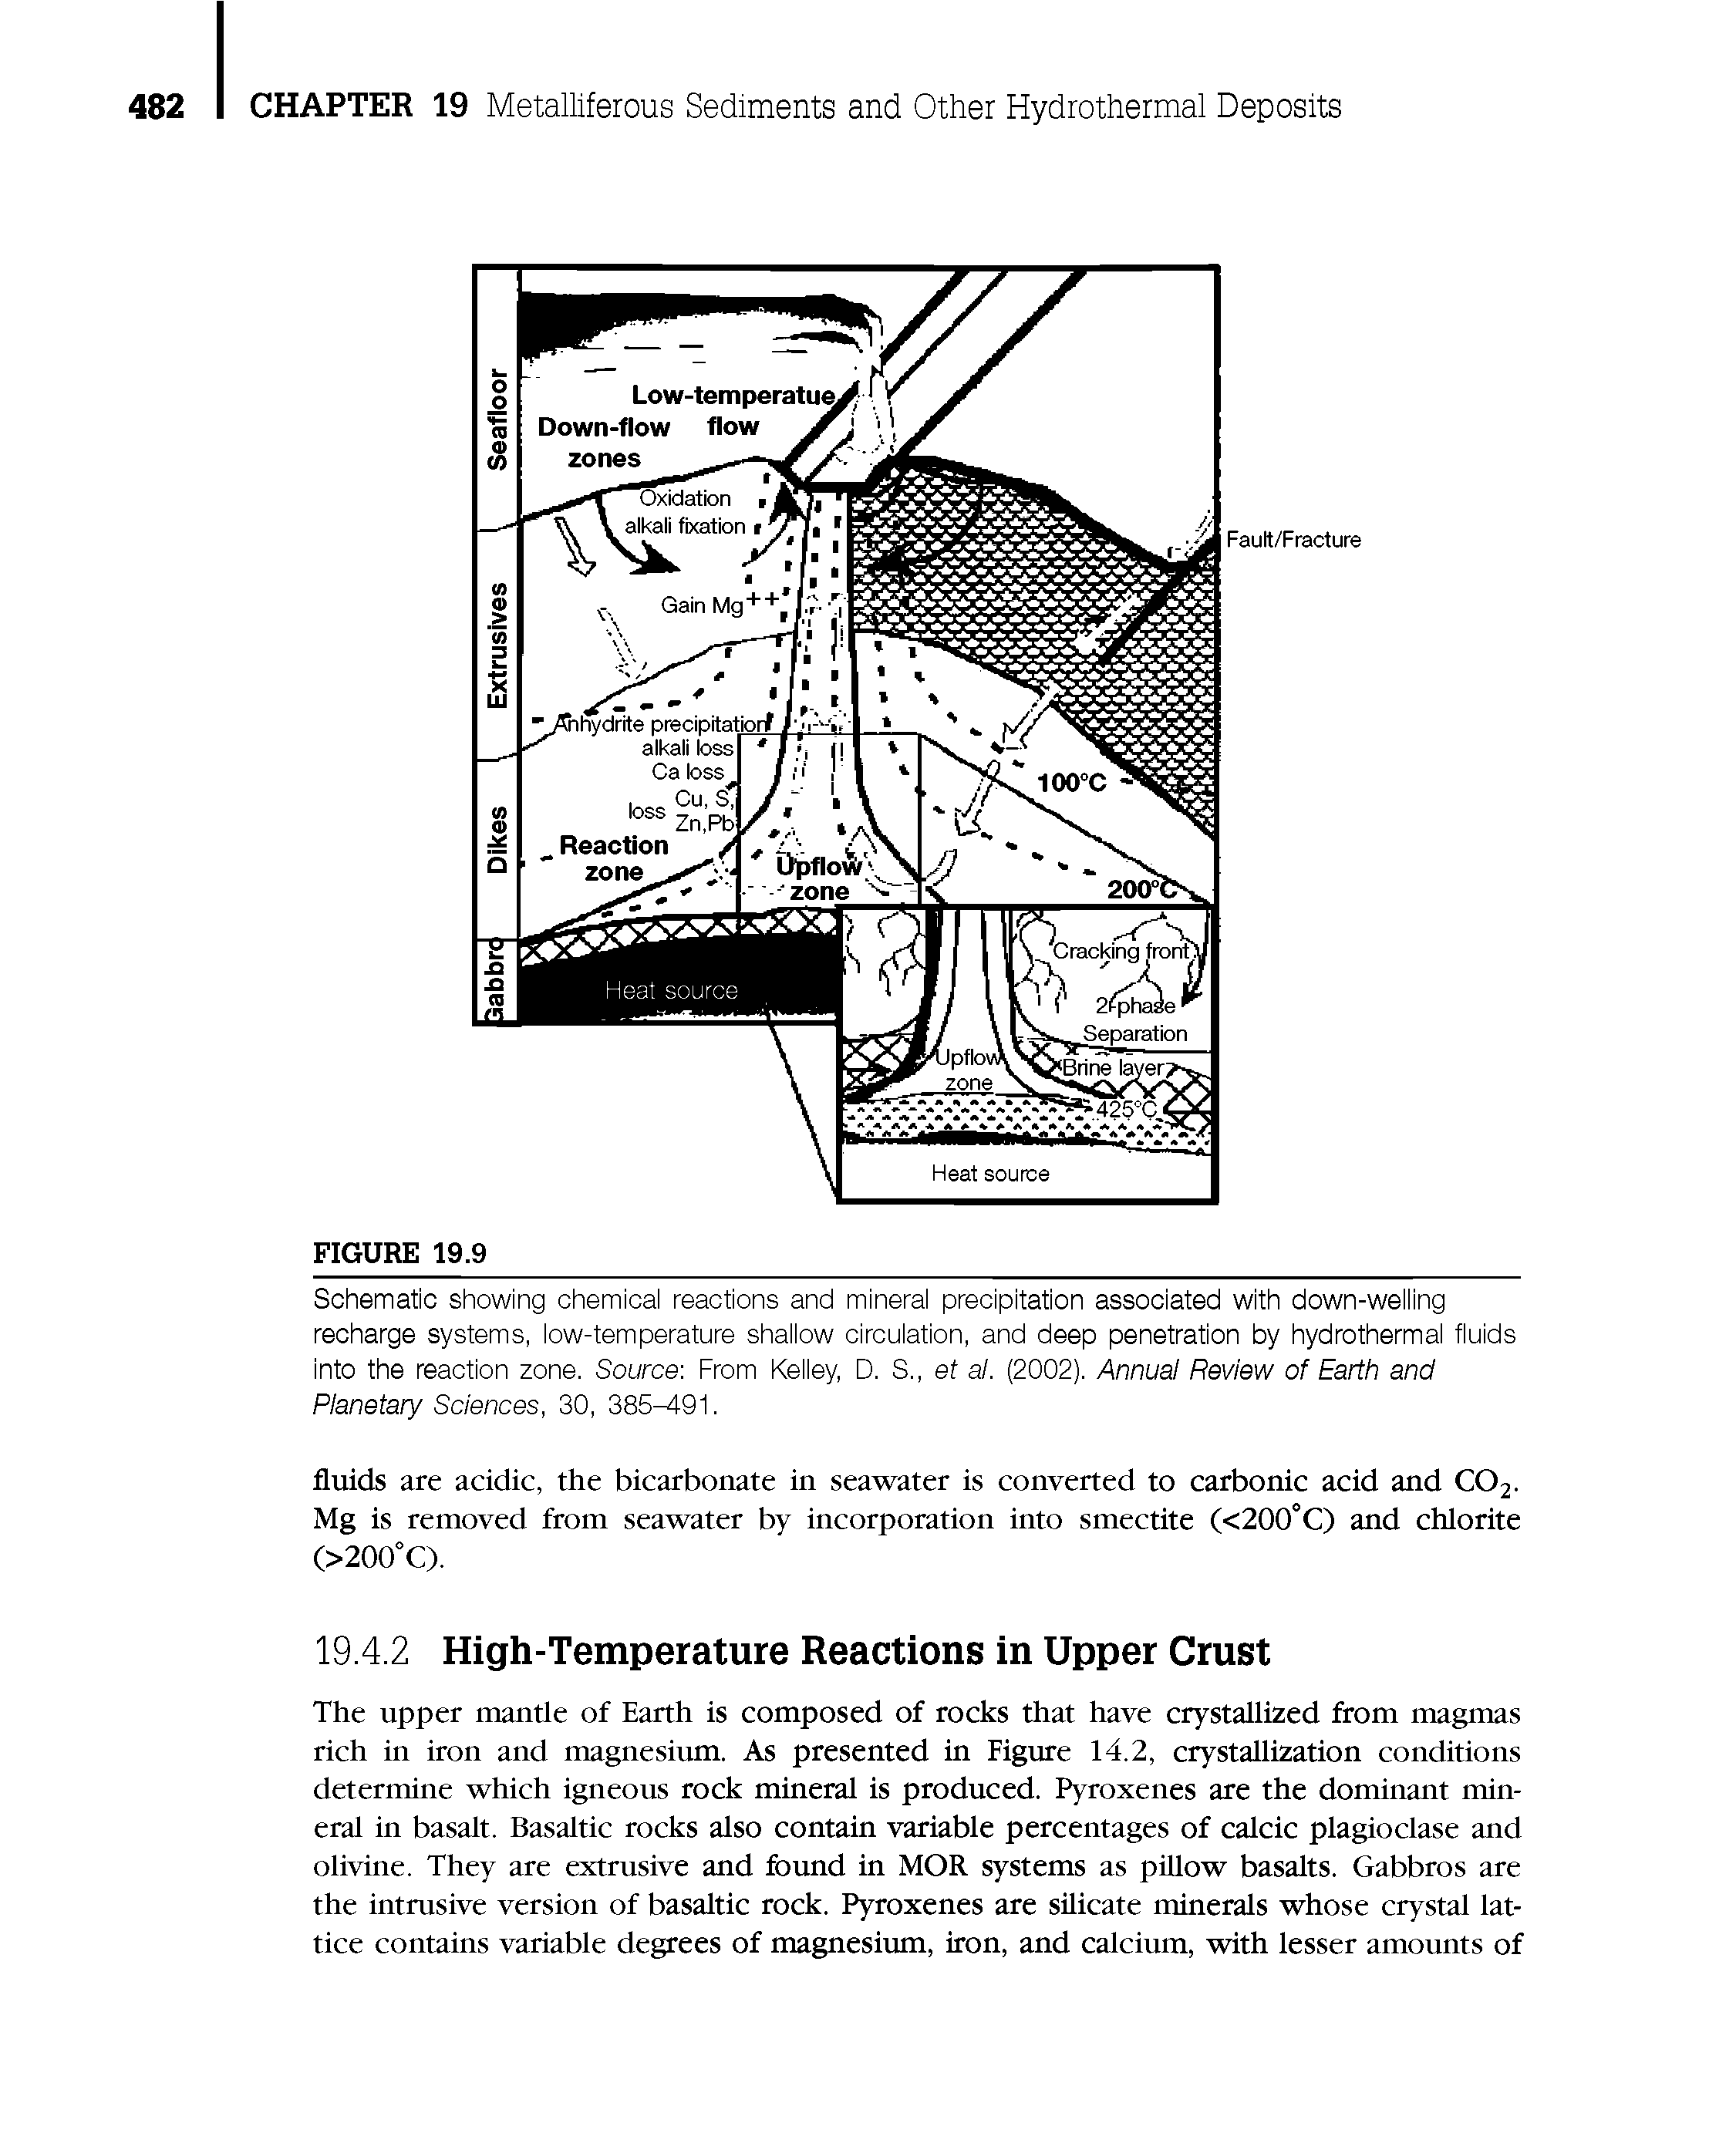 Schematic showing chemicai reactions and minerai precipitation associated with down-weiiing recharge systems, iow-temperature shaiiow circuiation, and deep penetration by hydrothermai fluids into the reaction zone. Source-. From Keiiey, D. S., et al. (2002). Annual Review of Earth and Planetary Sciences, 30, 385M91.